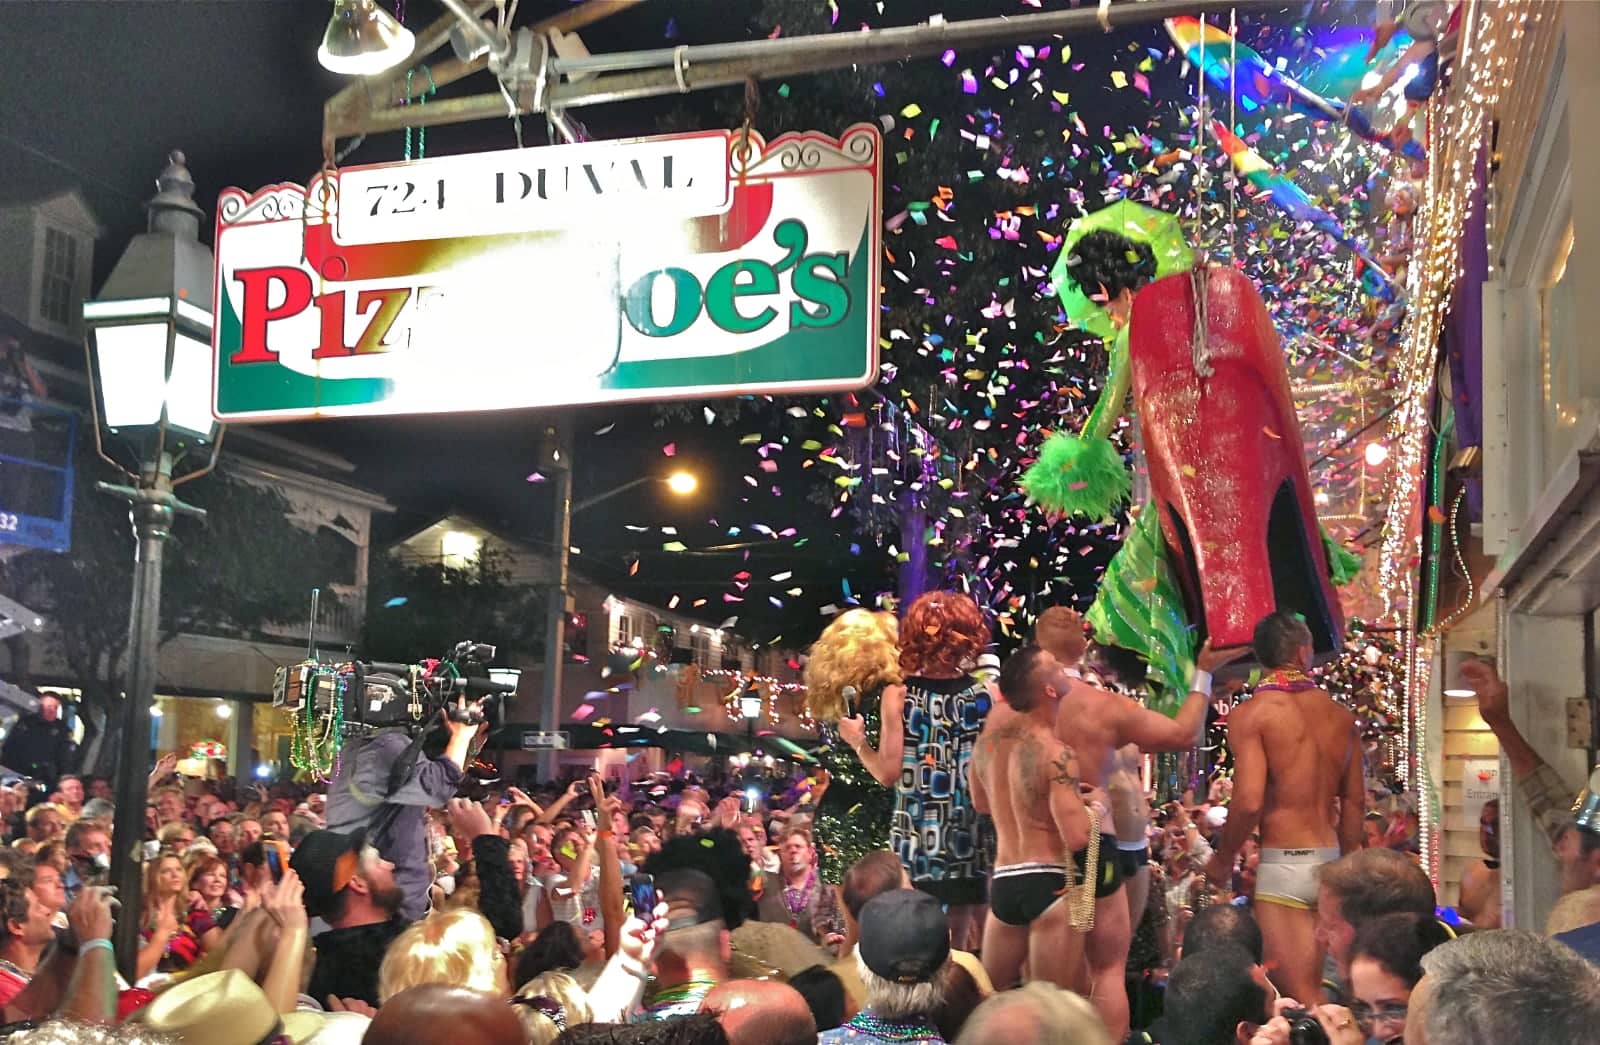 Crowd of men and women celebrating Mardi Gras in New Orleans